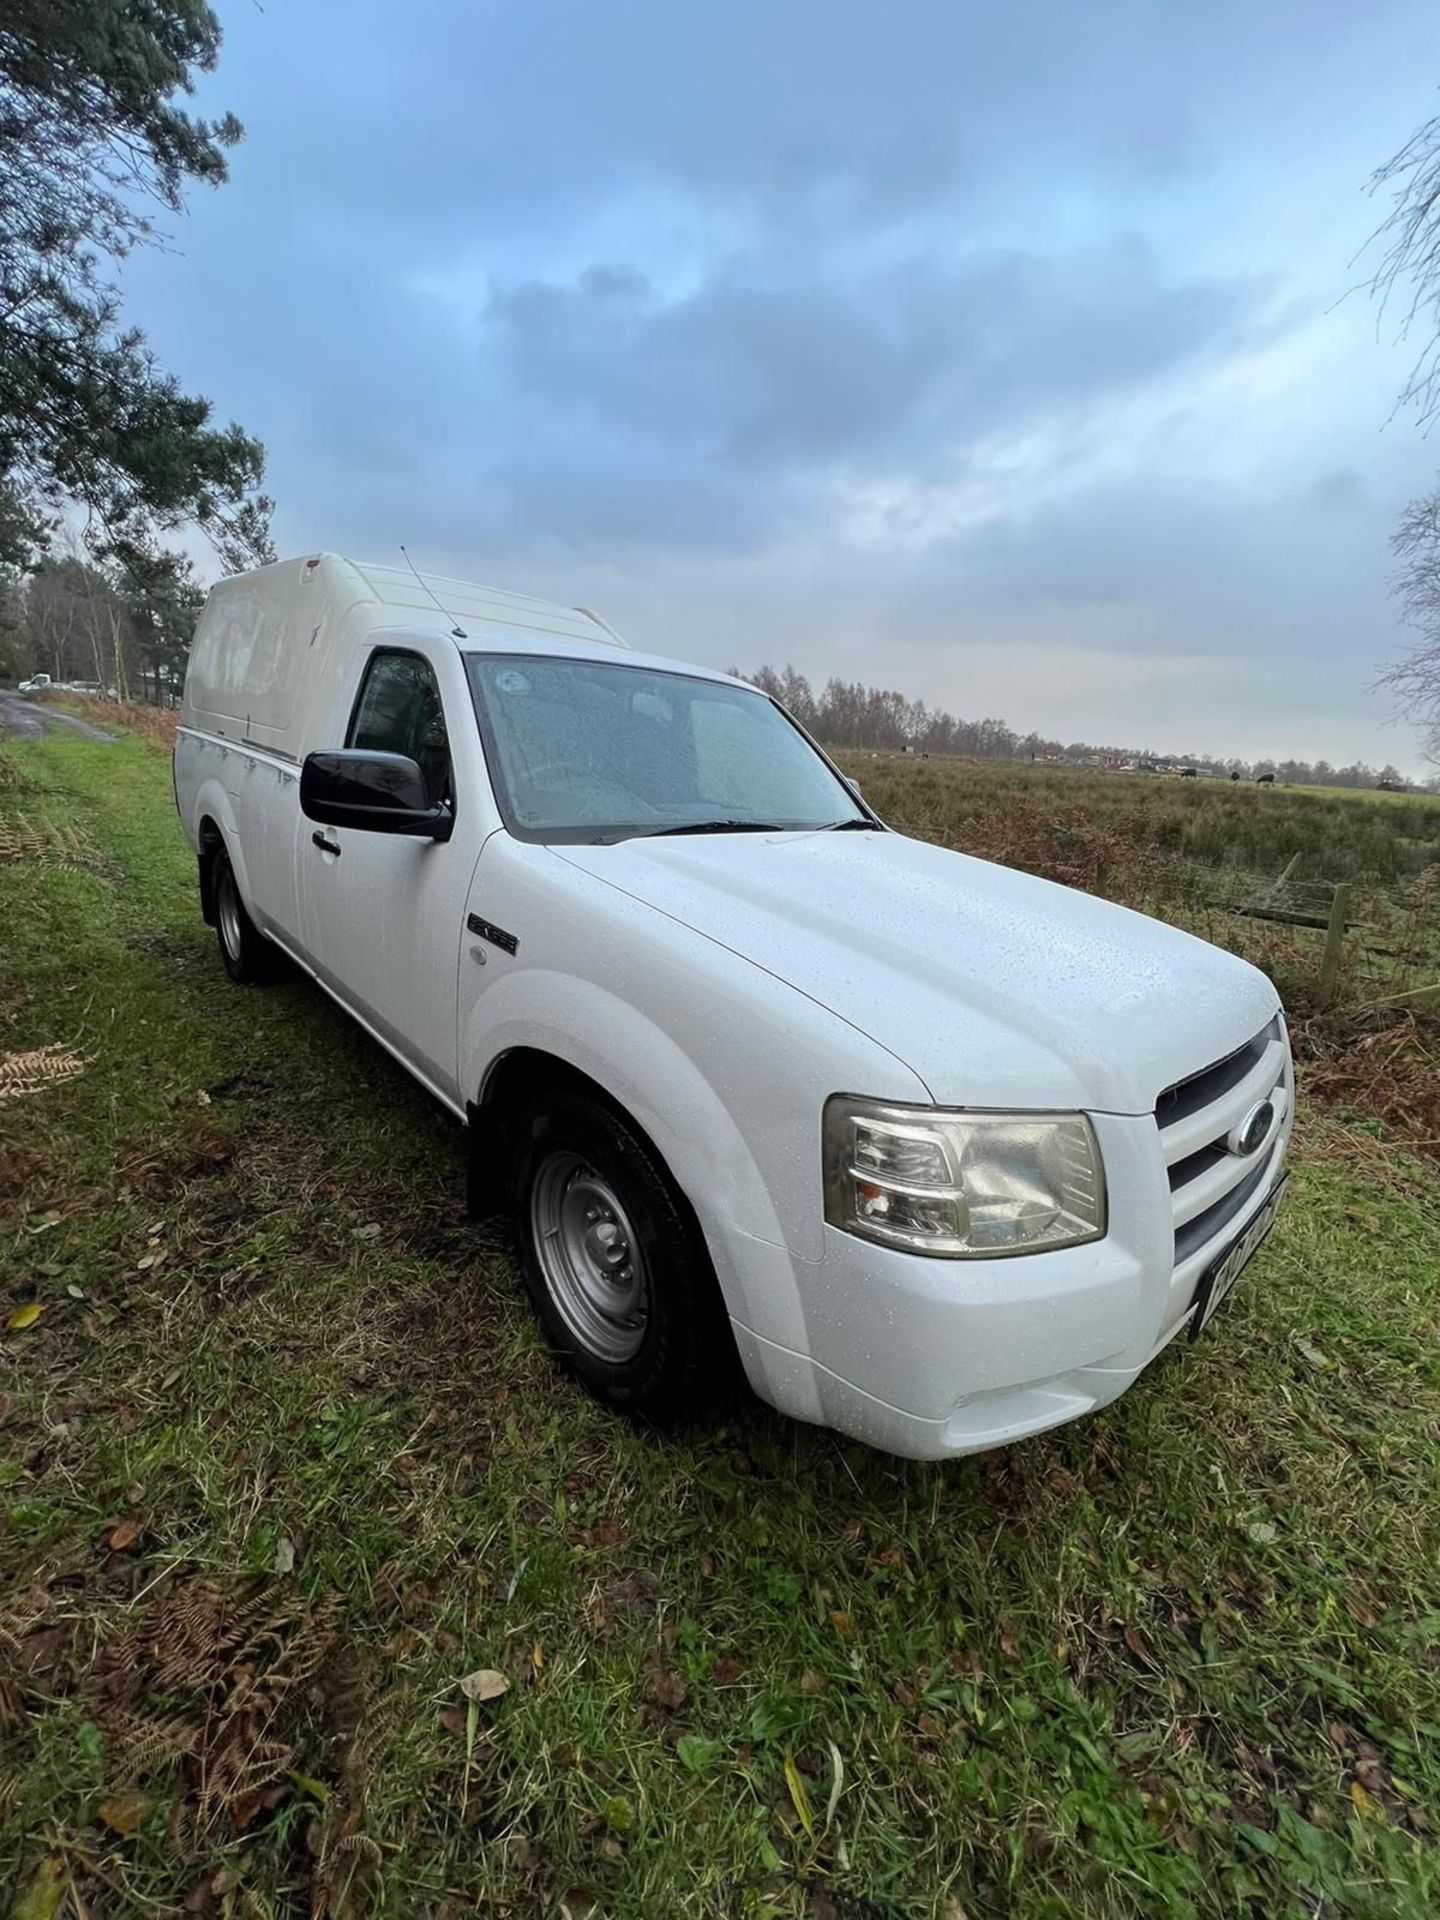 FORD RANGER SINGLE CAB PICKUP TRUCK 2WD EX NHS - Image 6 of 15